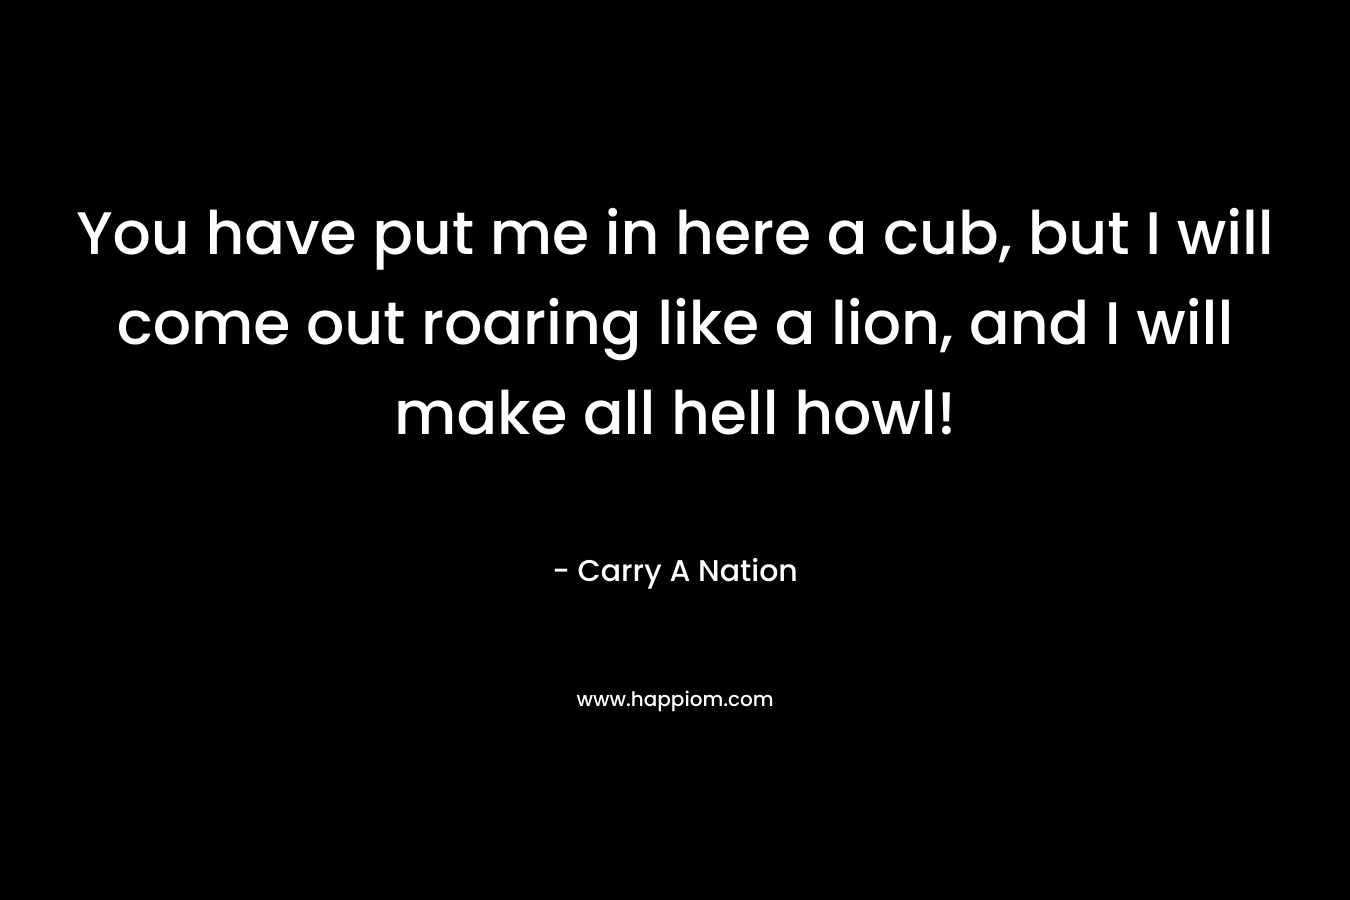 You have put me in here a cub, but I will come out roaring like a lion, and I will make all hell howl! – Carry A Nation